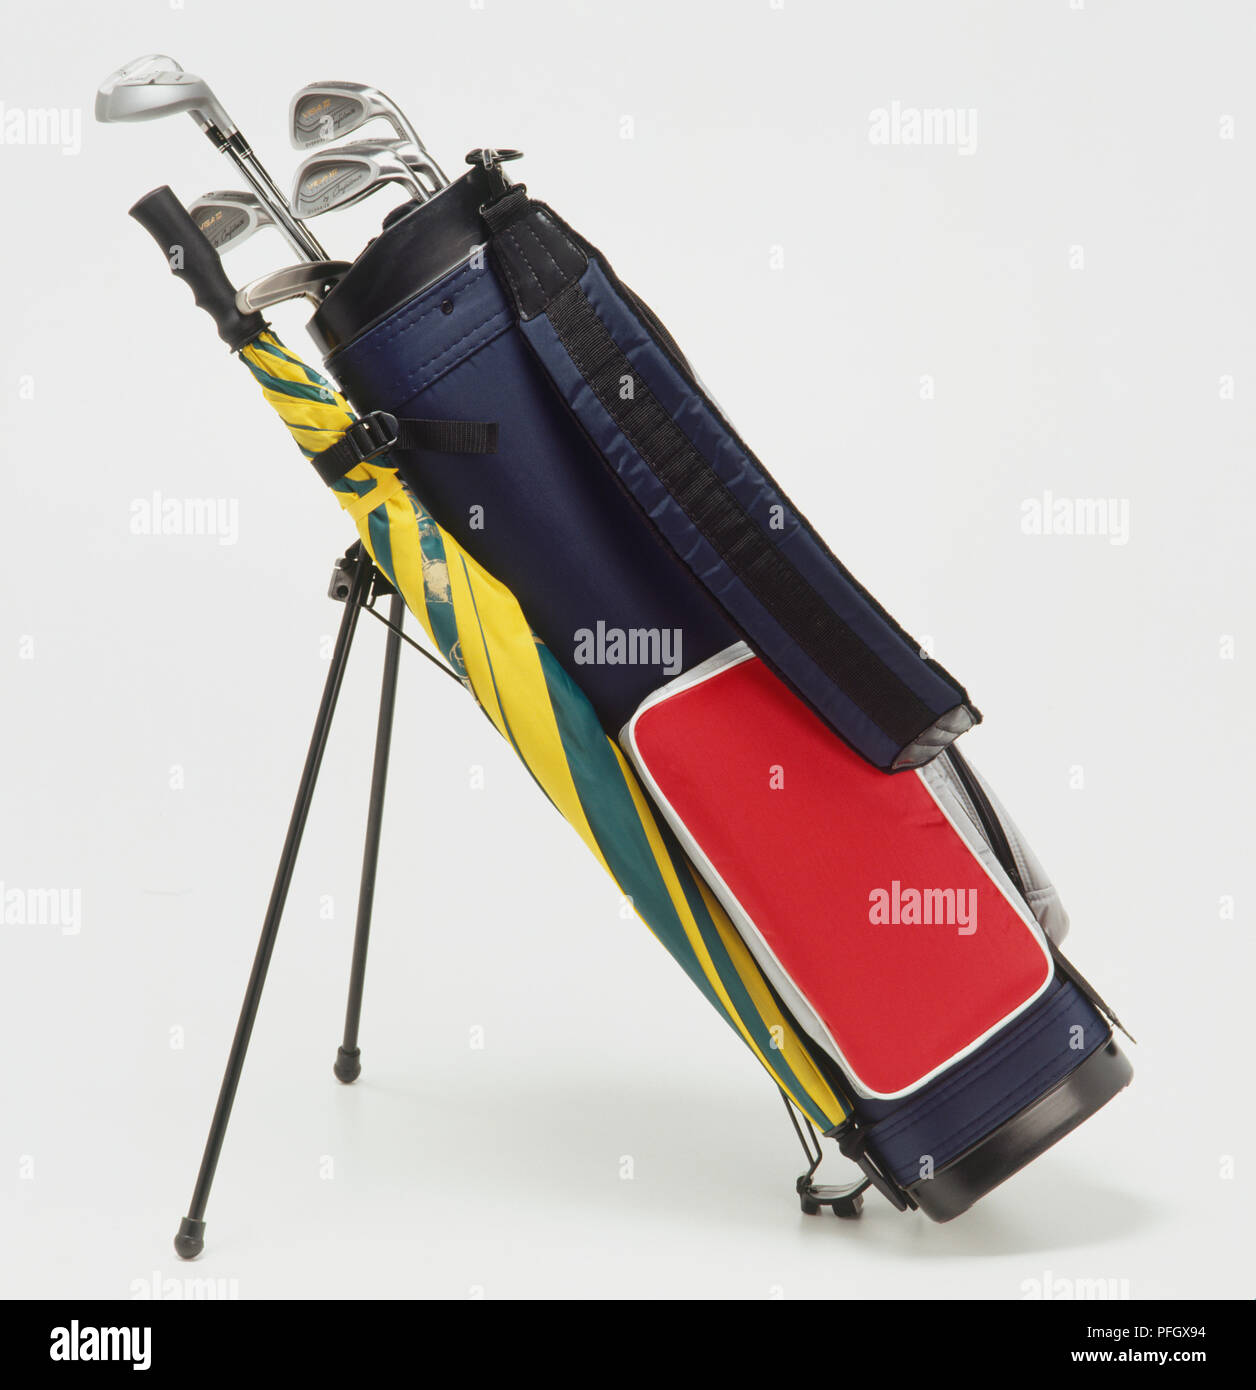 Golf bag including putters. Stock Photo